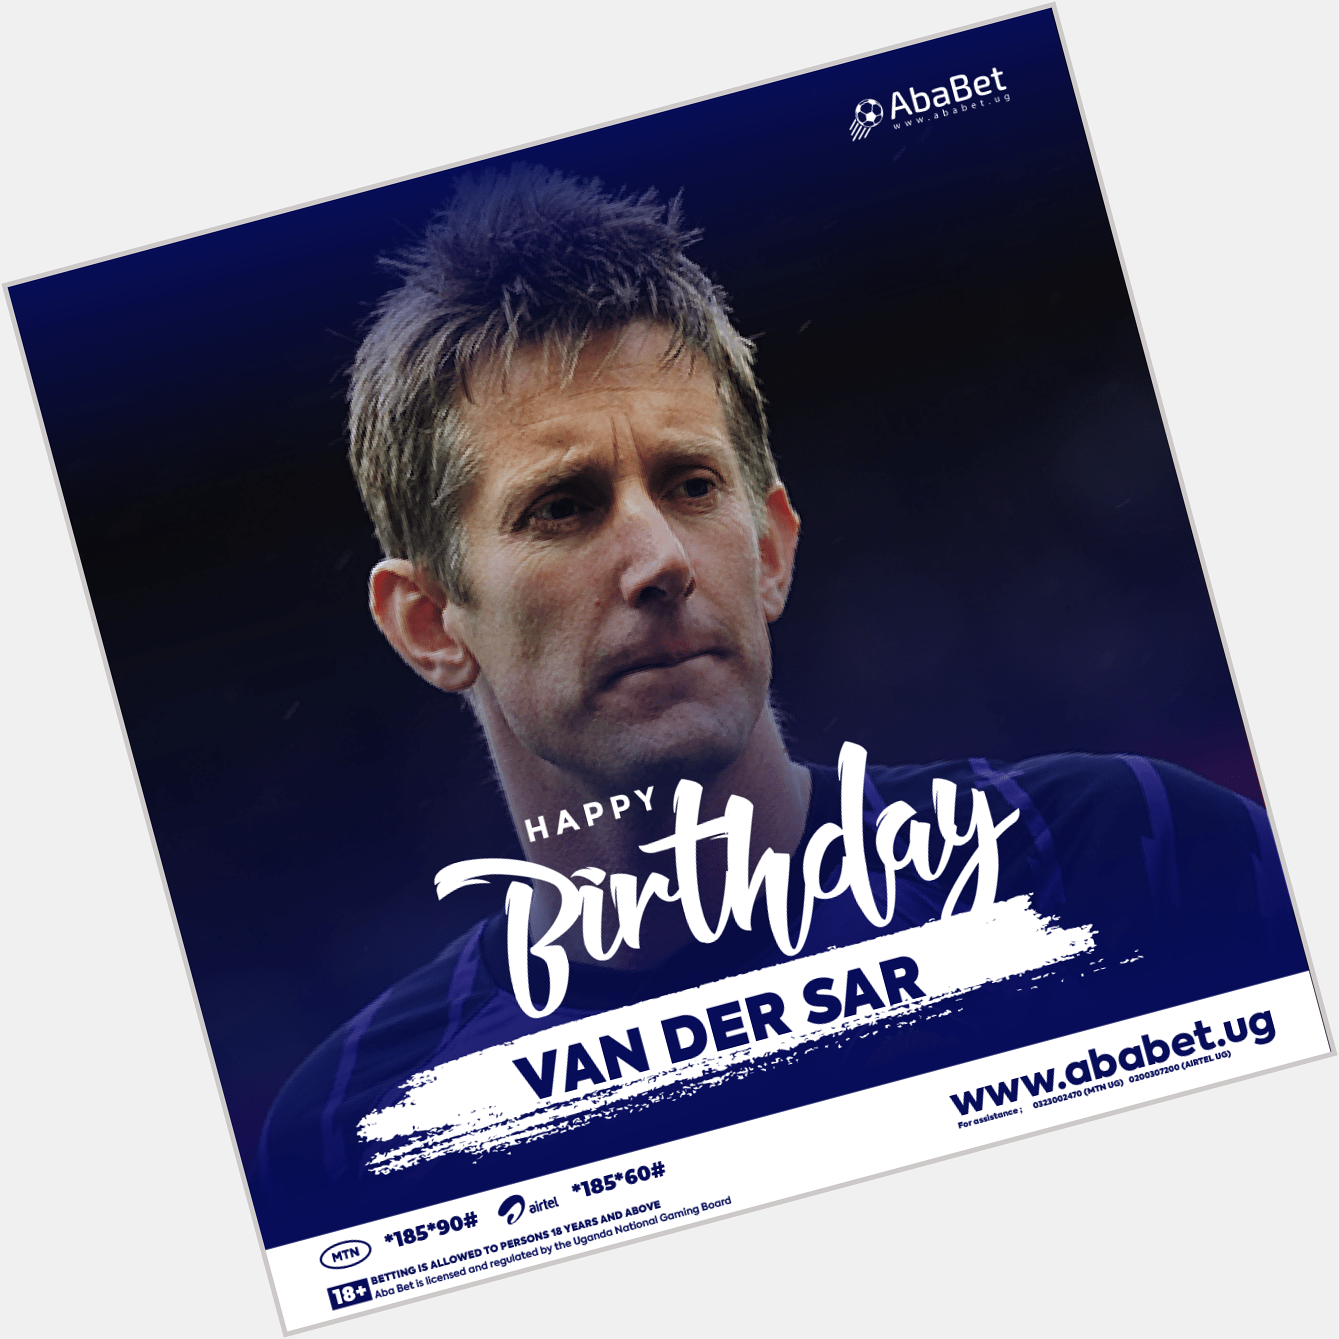 Happy 52nd birthday, Edwin van der Sar. What is his most memorable save?  